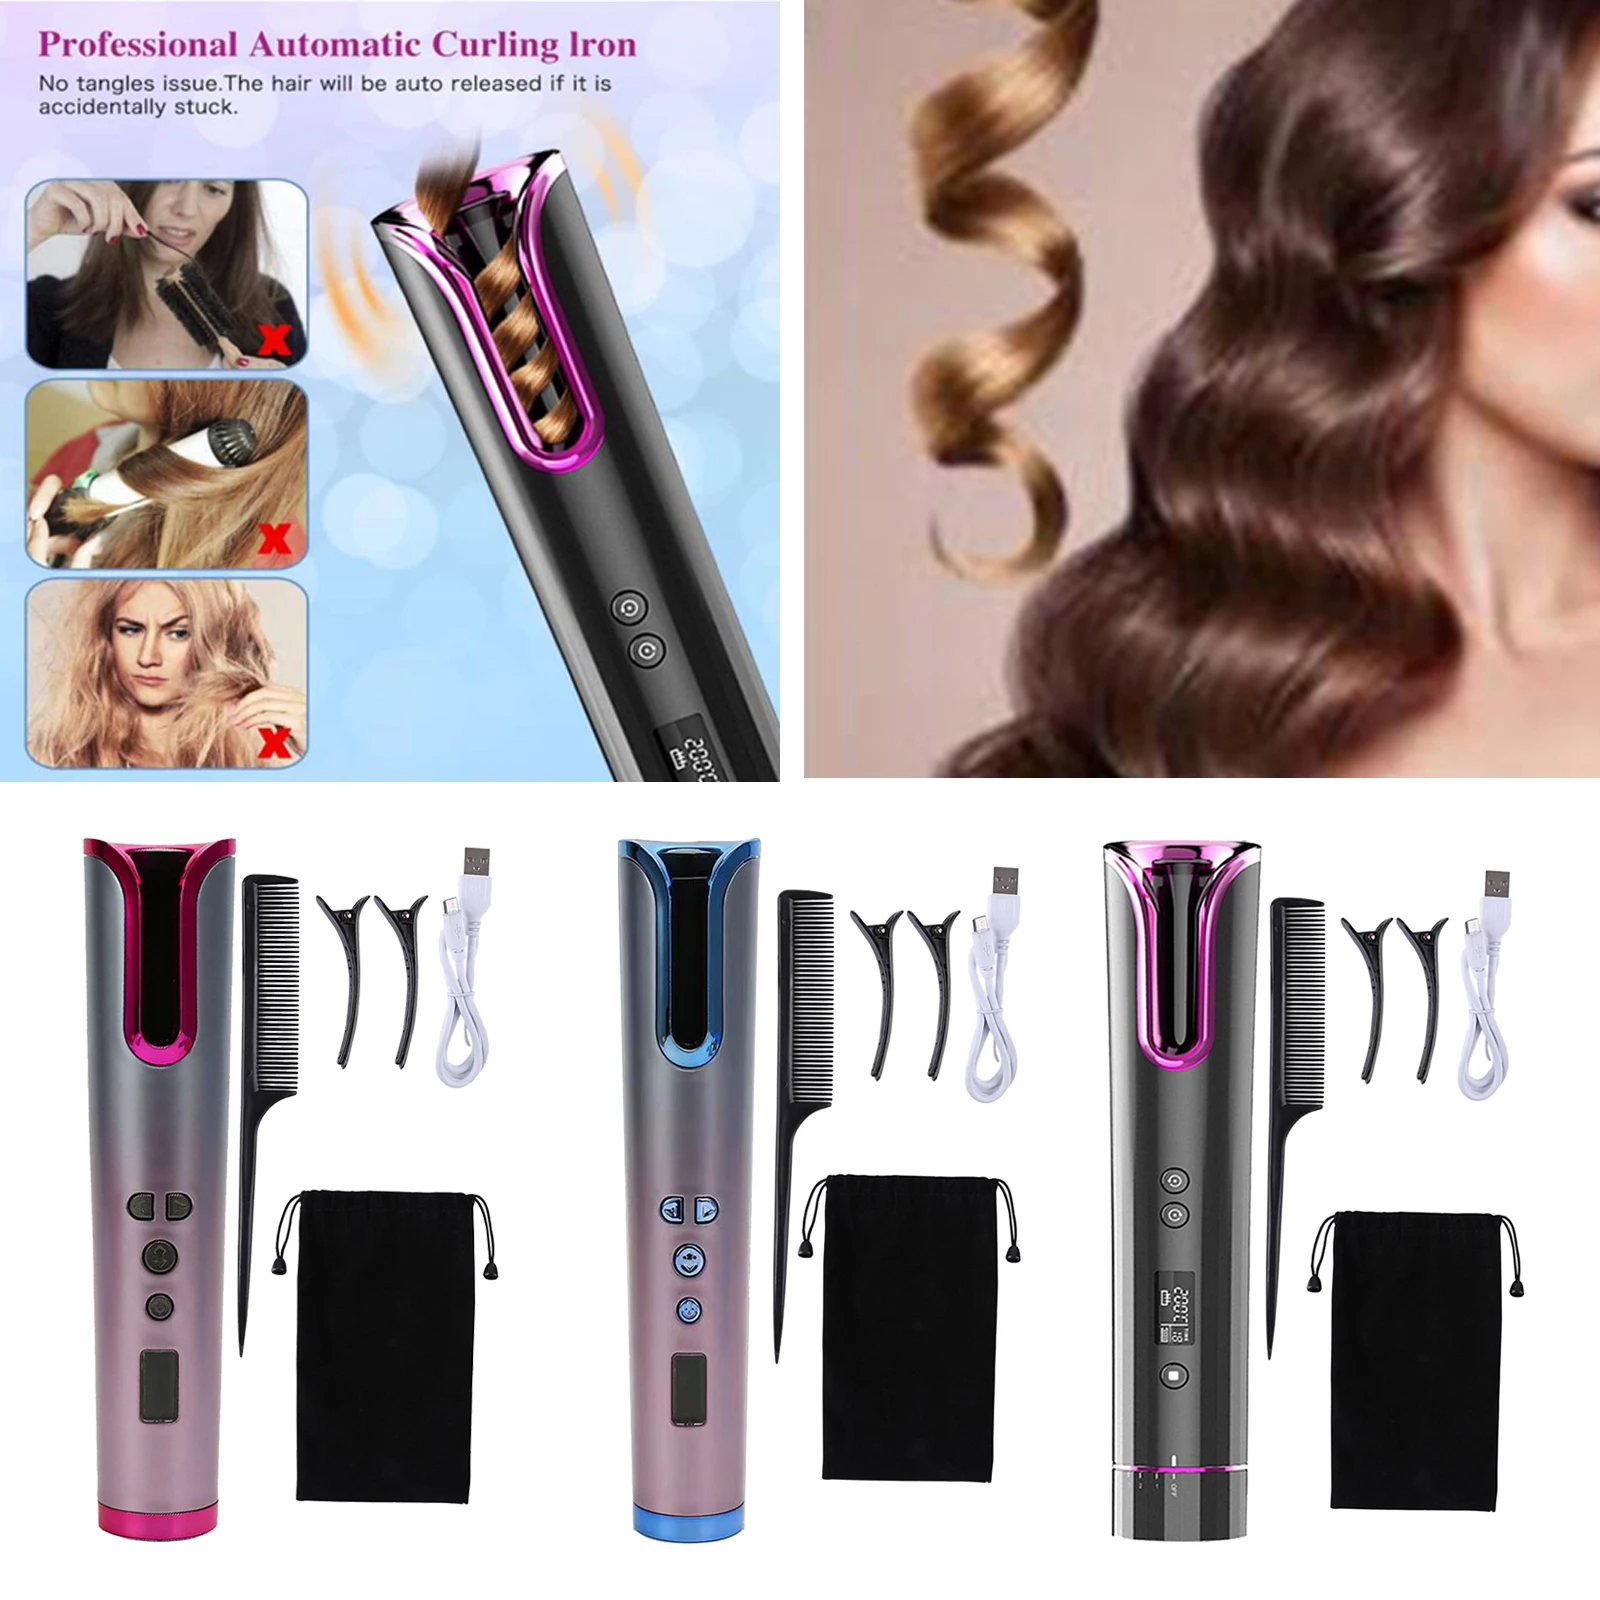 Cordless Automatic Hair Curler USB Rechargeable Curling Wand Auto Shut-Off Fast Heating 6 Temperature Wireless Curling